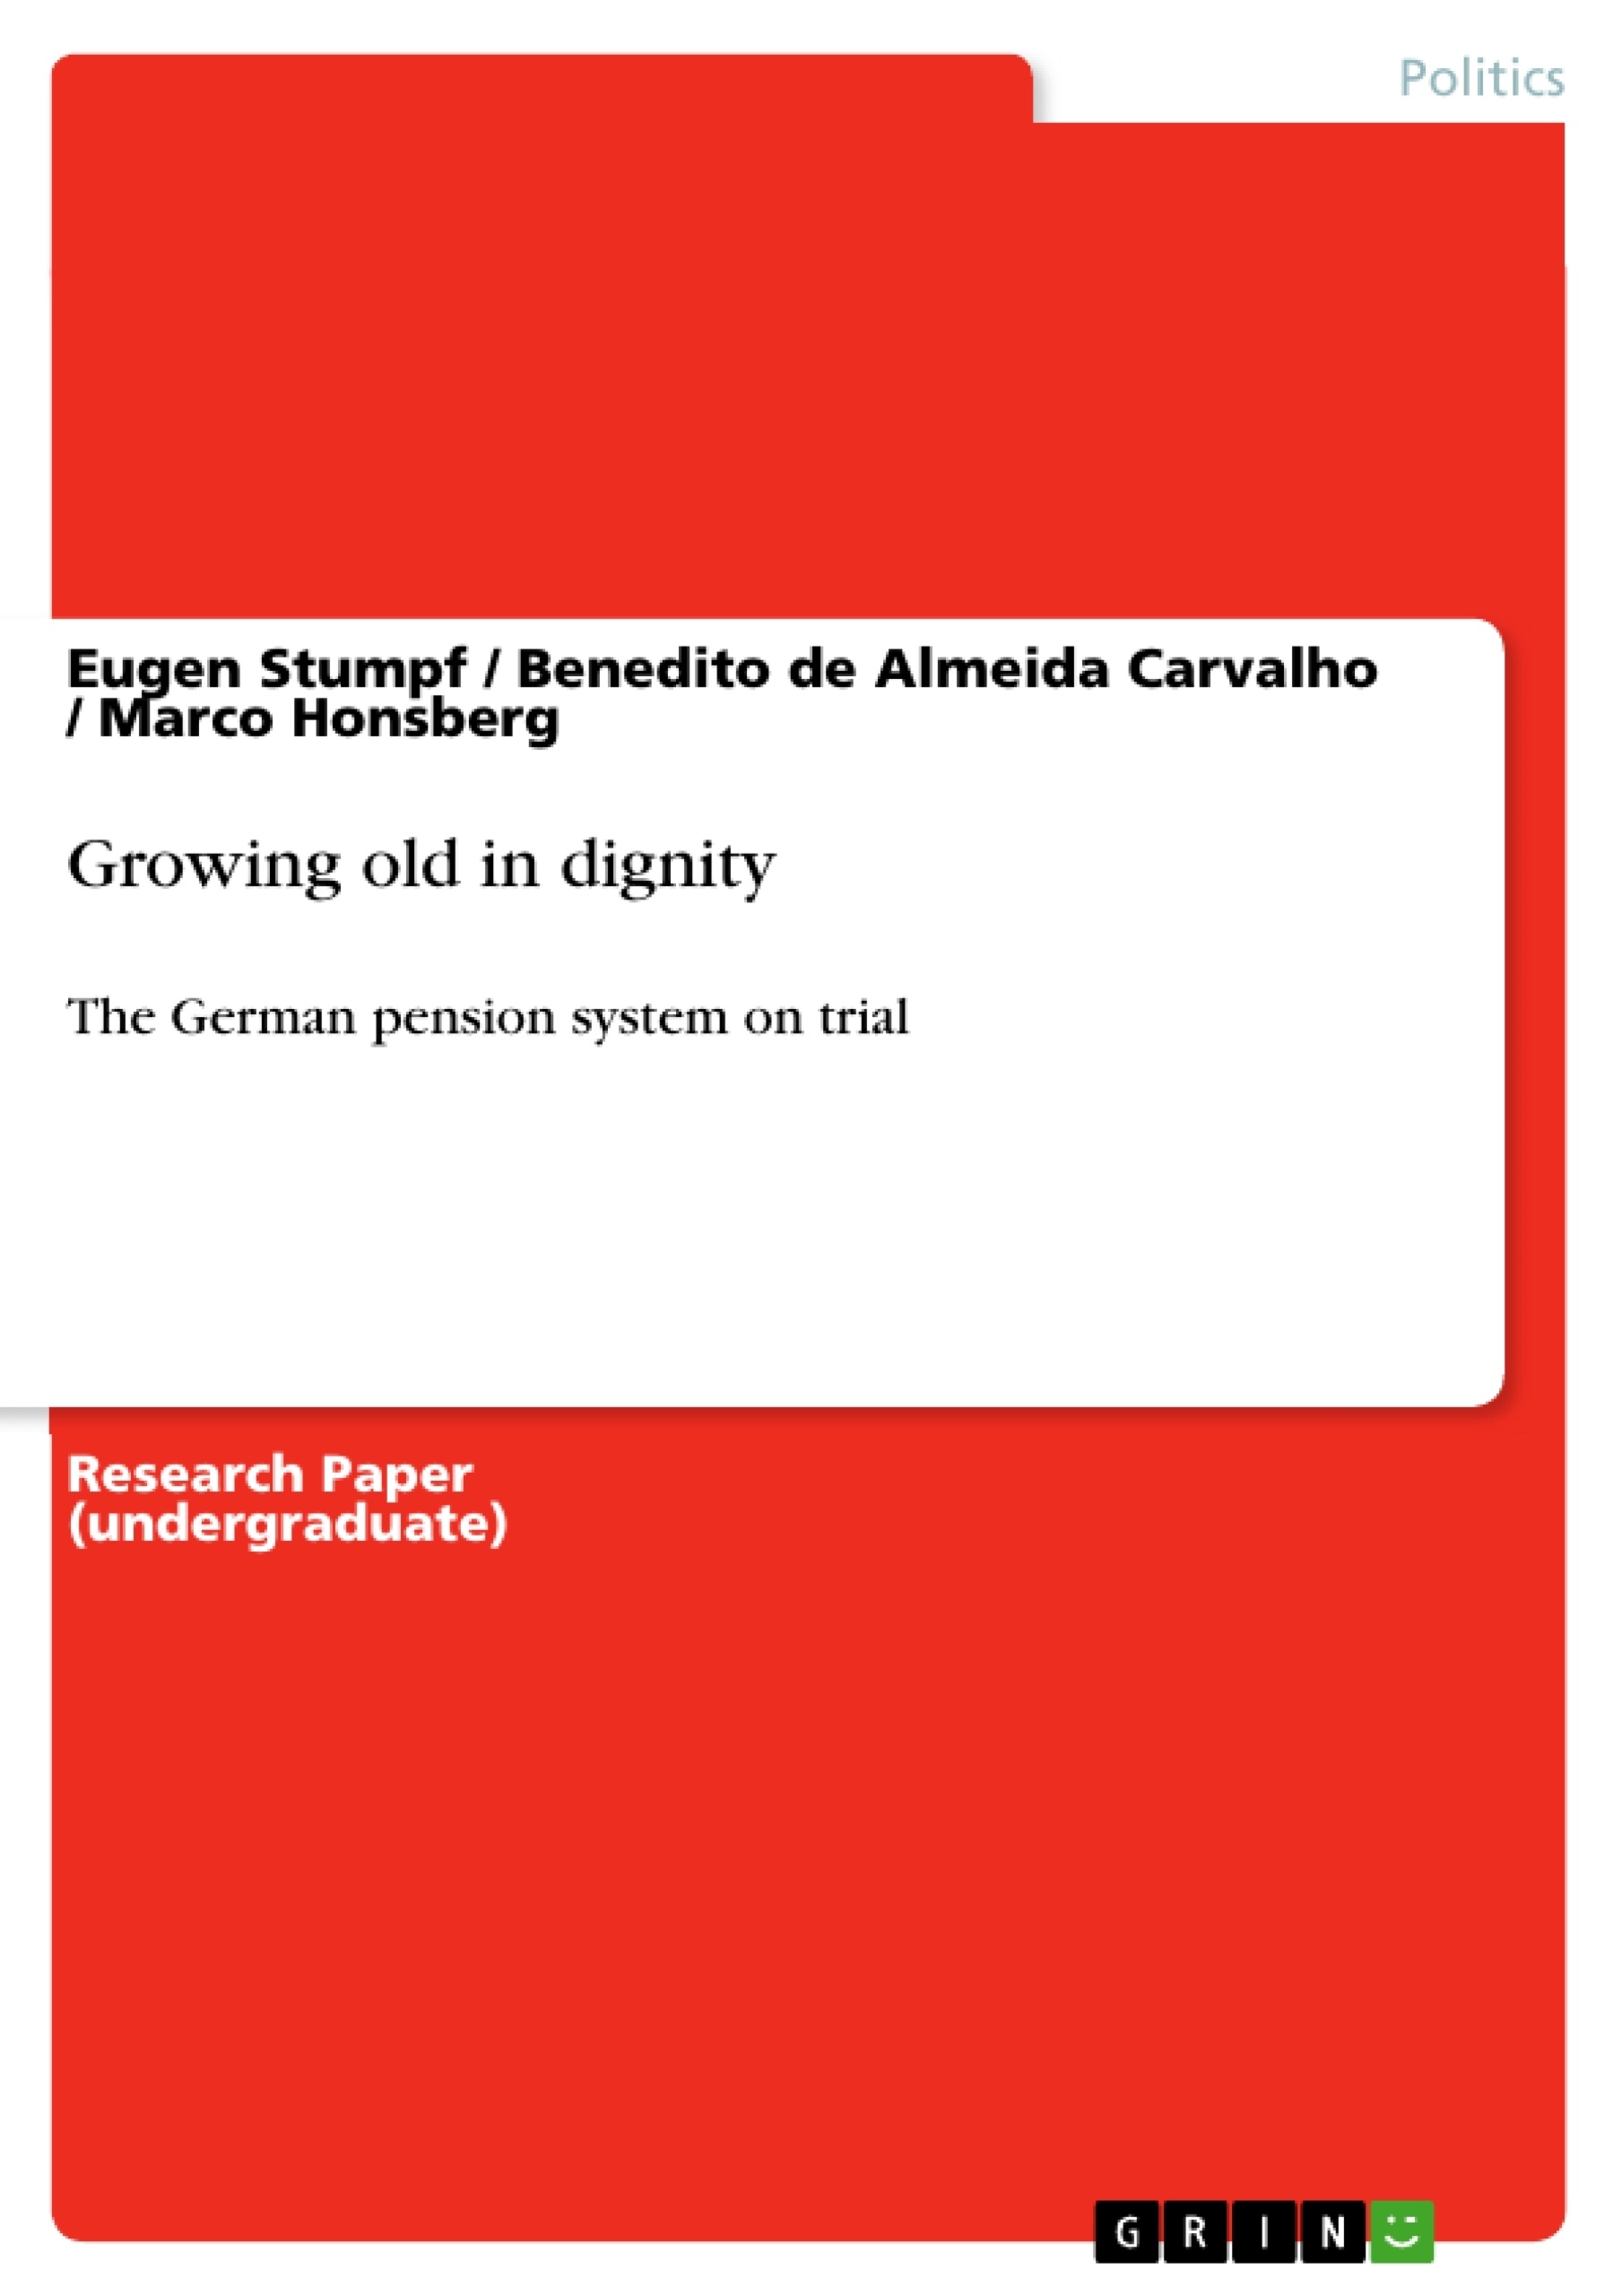 Título: Growing old in dignity